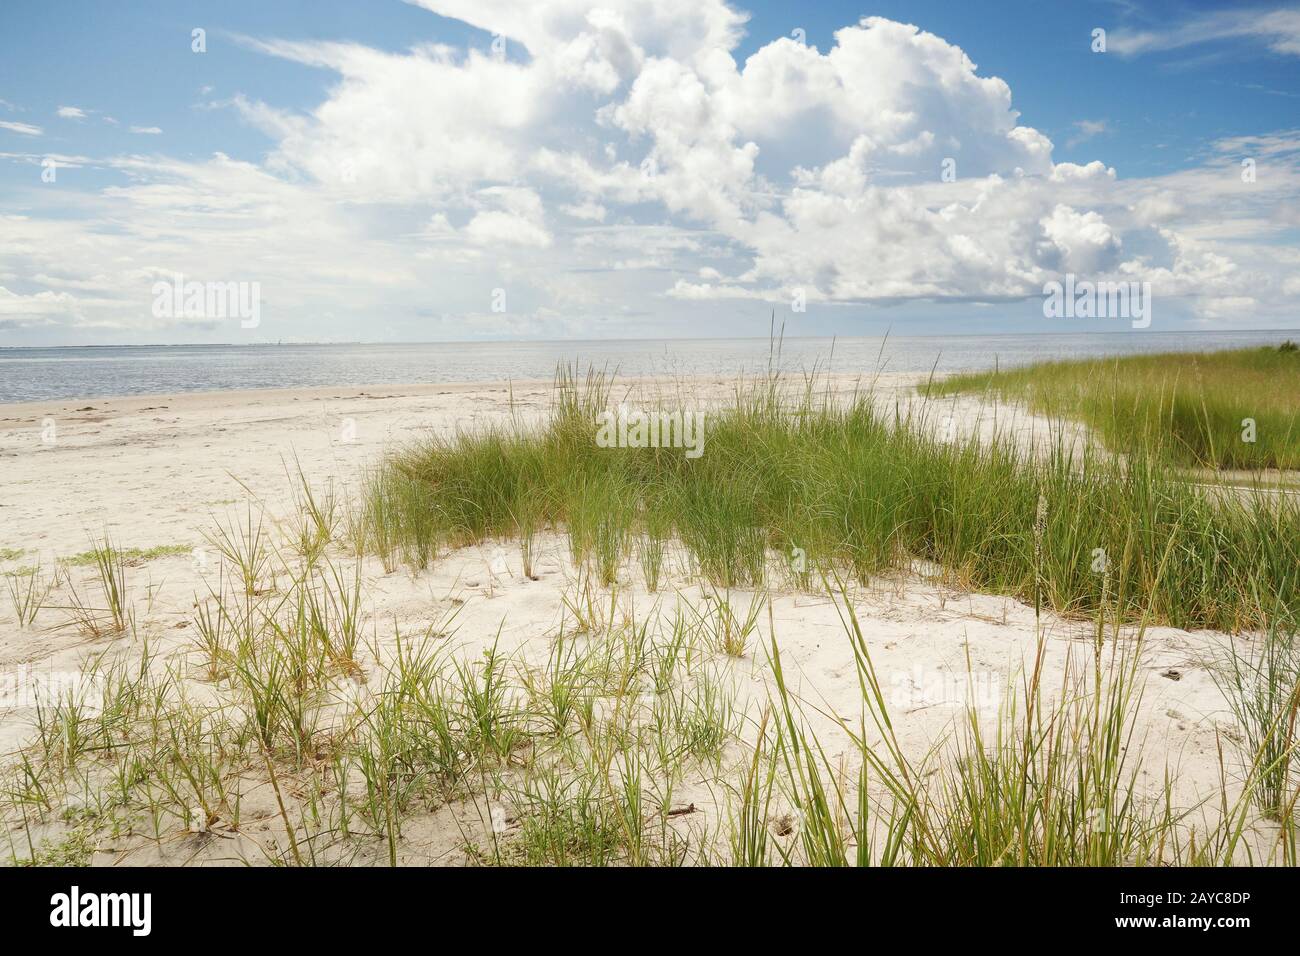 Pamlico Sound beach of the North Carolina Outer Banks Stock Photo